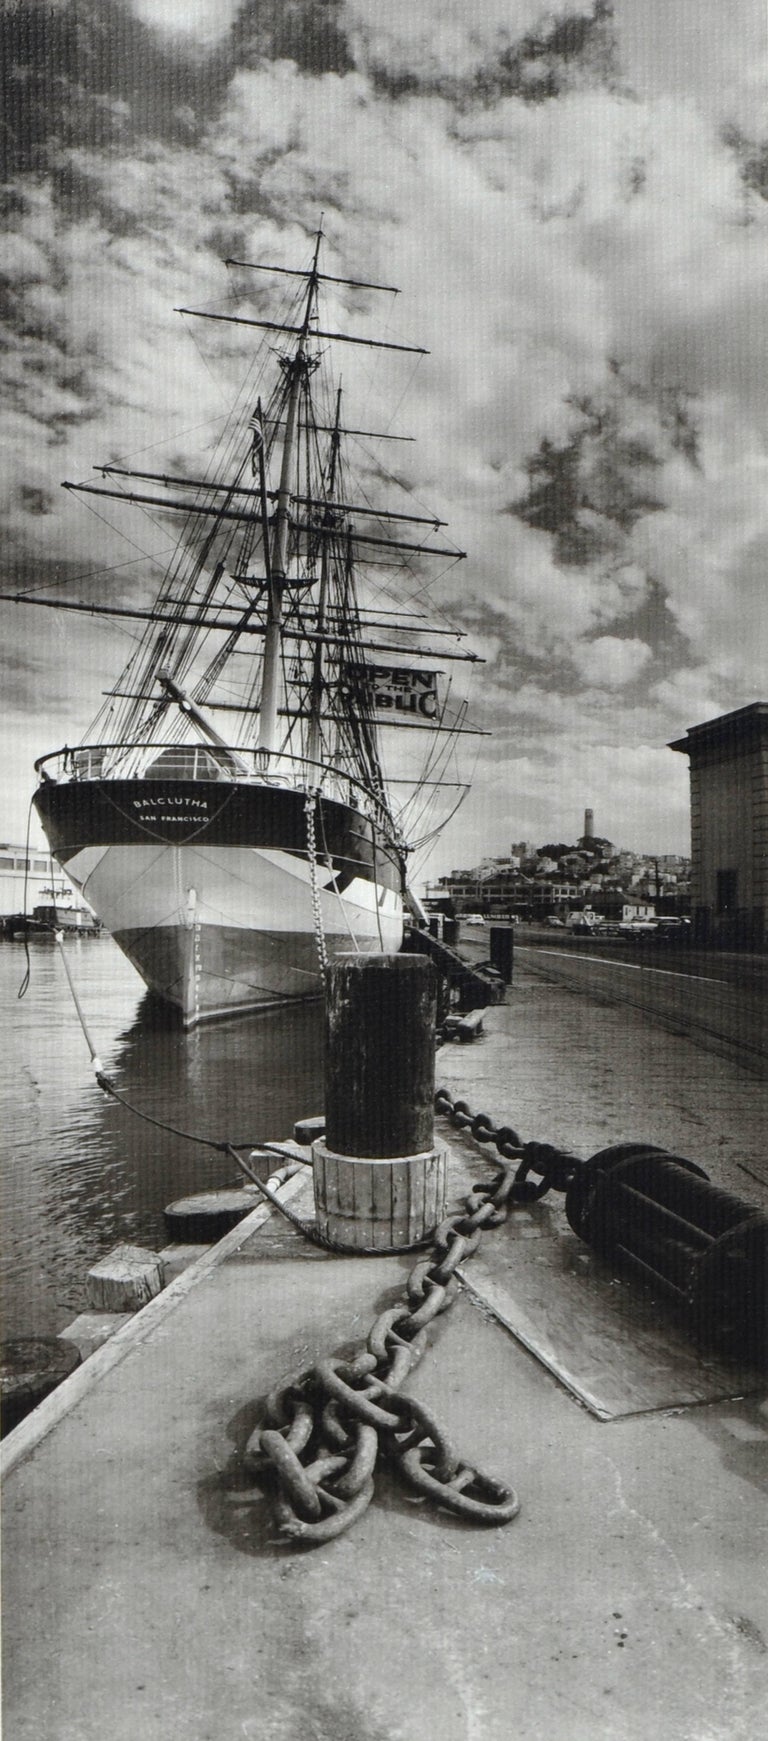 A beautiful black and white photograph of the ship 